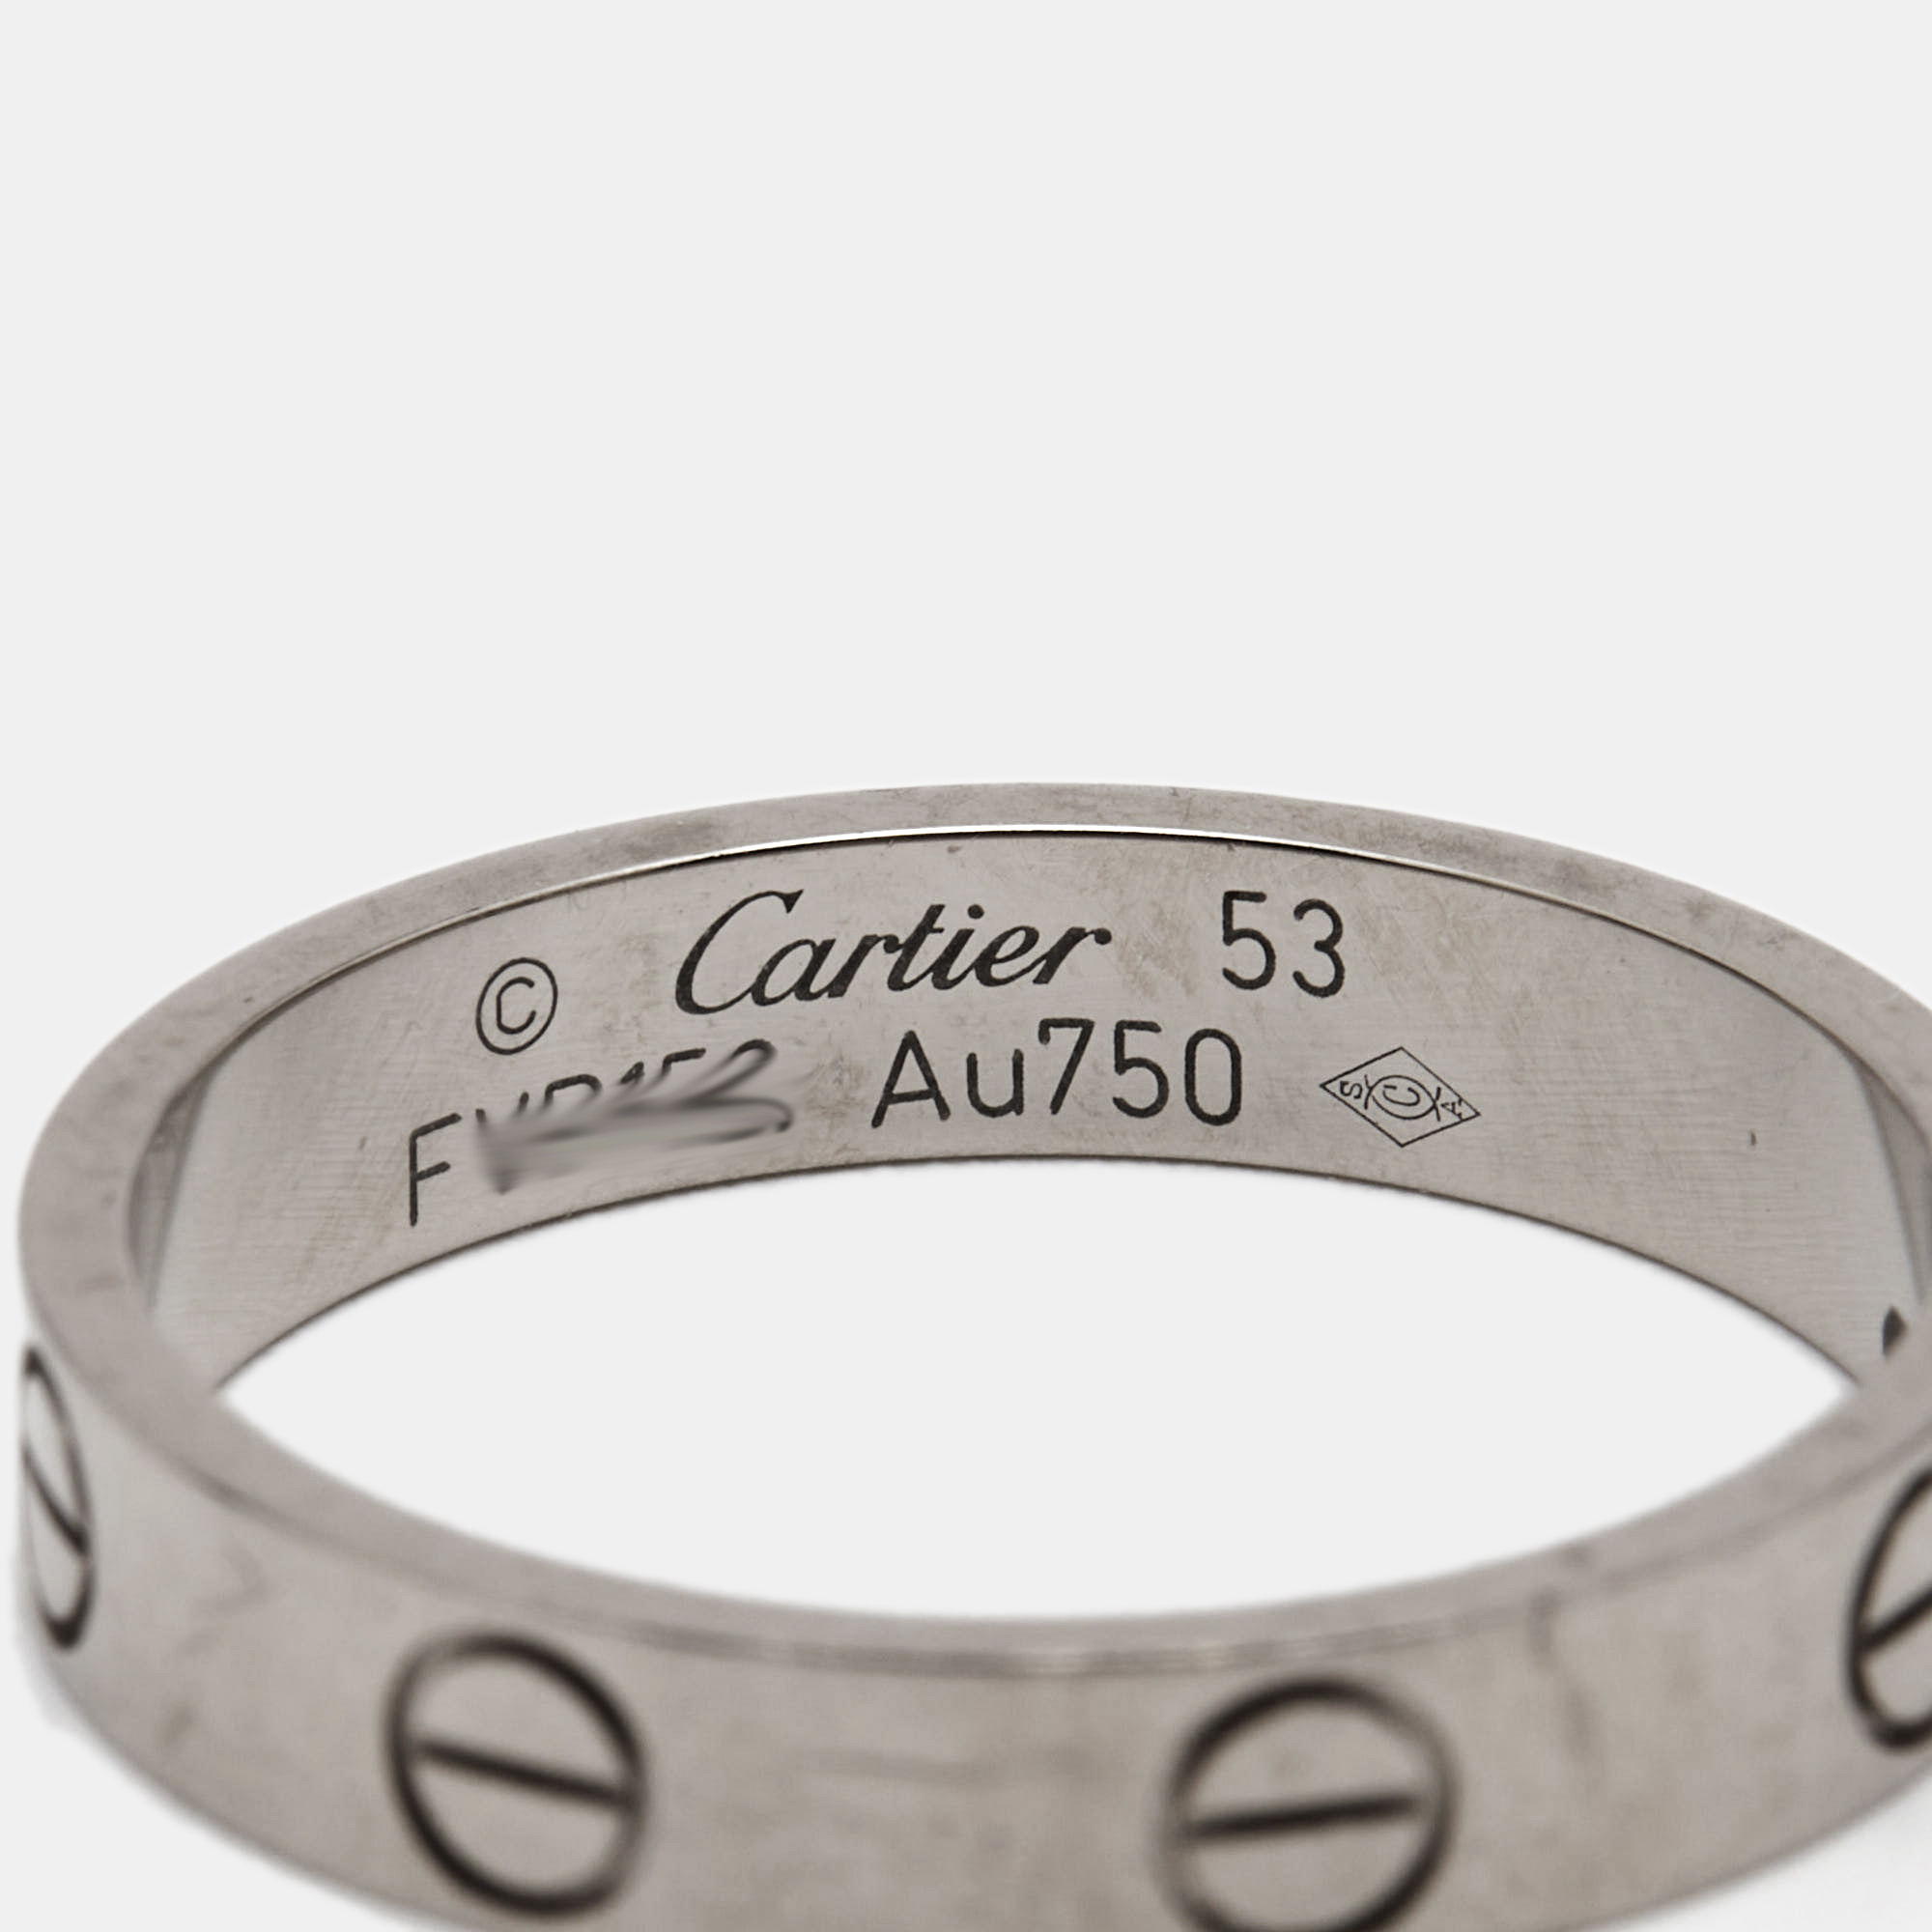 Cartier Love 18K White Gold Narrow Wedding Band Ring Size 53